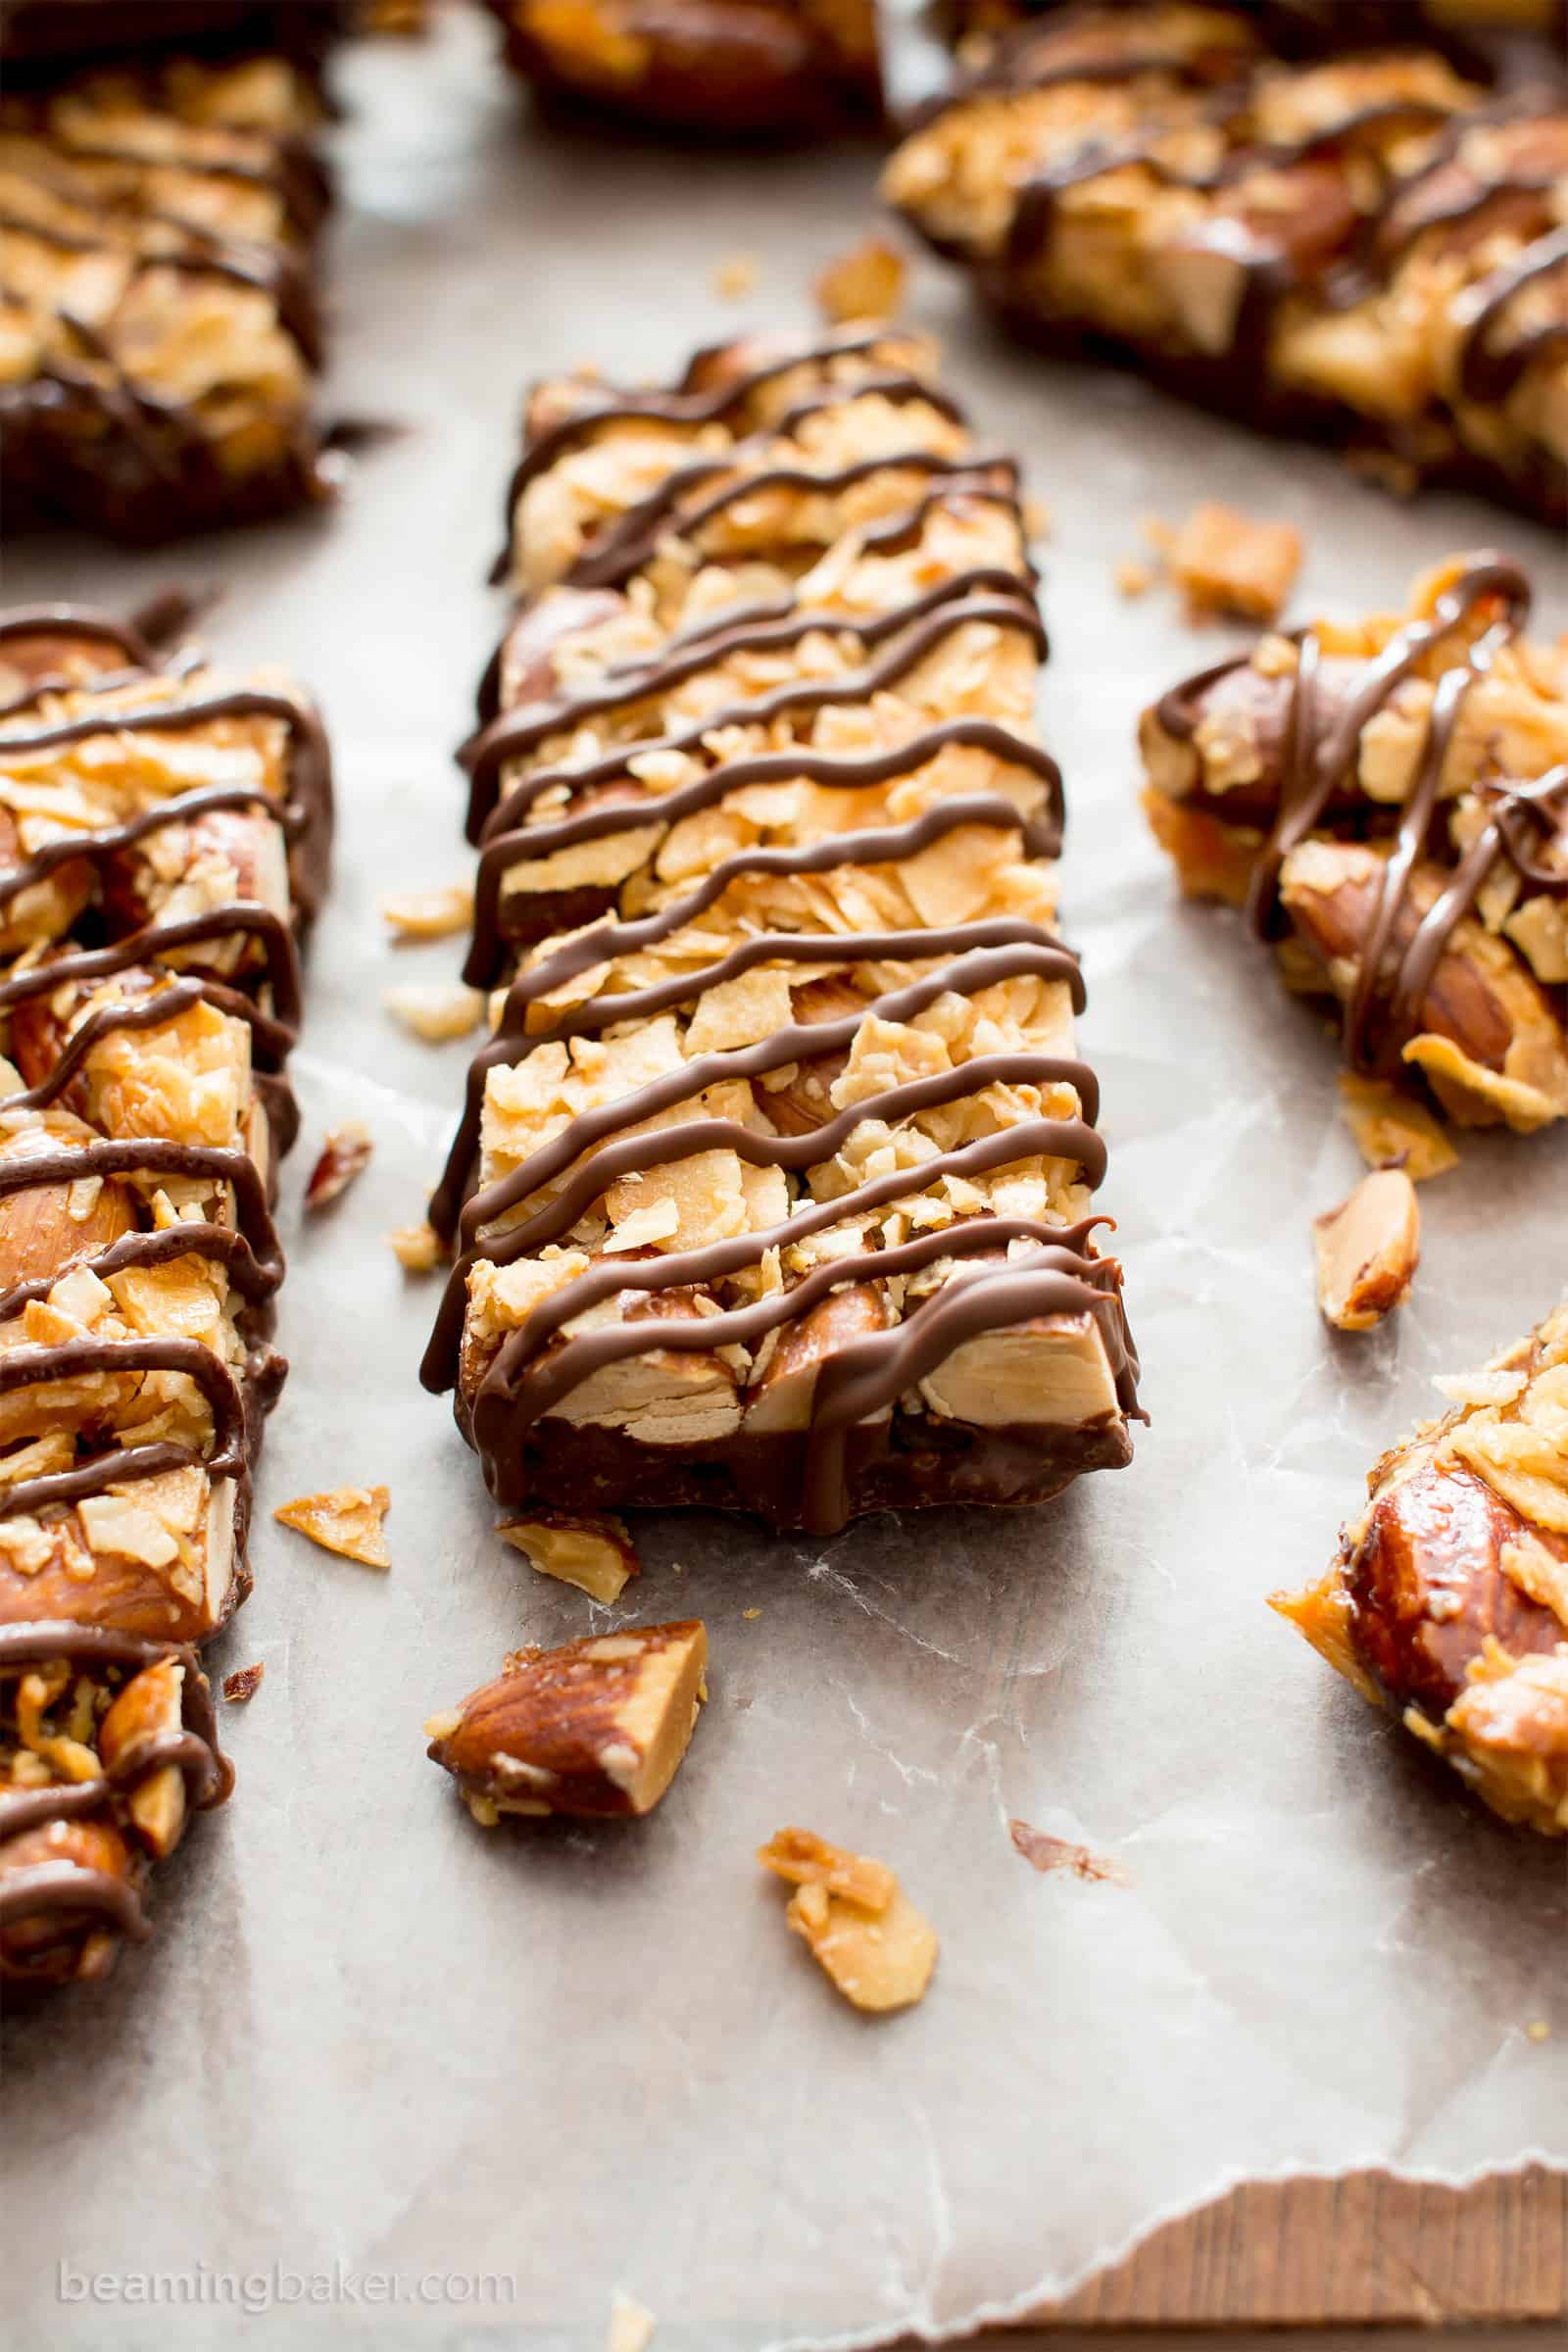 5 Ingredient Dark Chocolate Almond & Coconut Homemade KIND Bars (V, GF): an easy recipe for homemade KIND bars coated in a rich layer of chocolate. #Paleo #Vegan #GlutenFree #Healthy #DairyFree #Chocolate #Snacks | Recipe on BeamingBaker.com